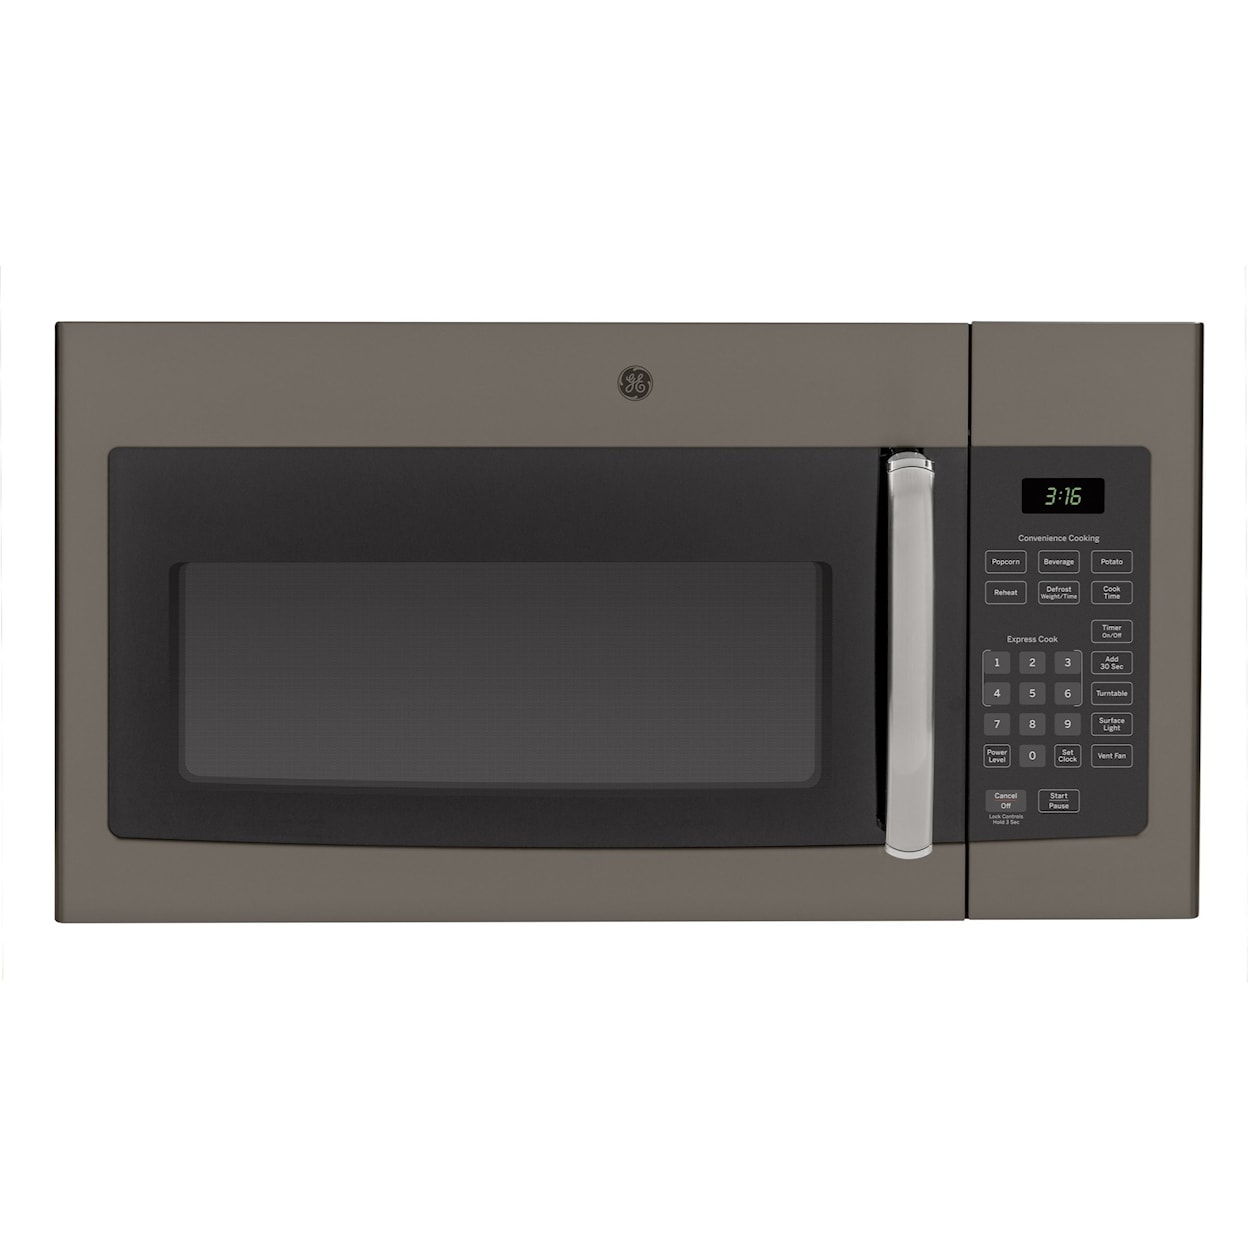 GE Appliances Microwaves 1.6 Cu. Ft. Over-the-Range Microwave Oven